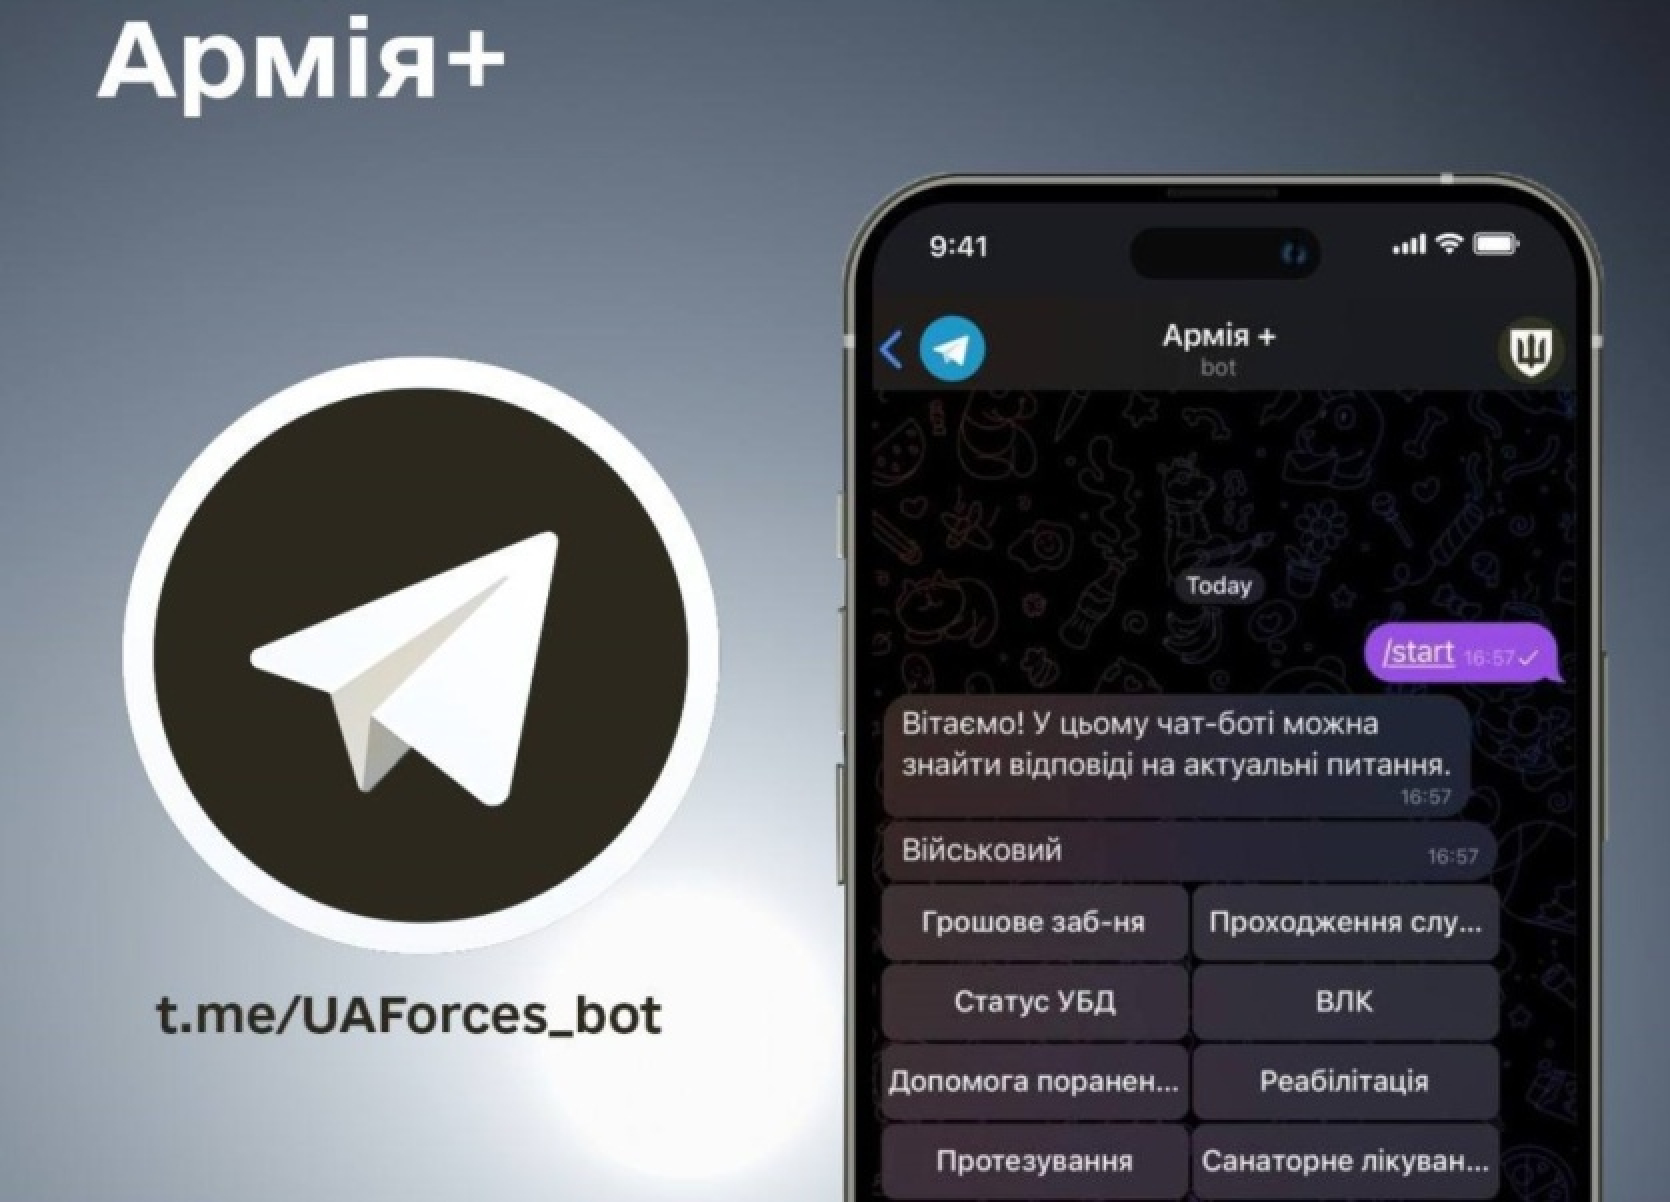 Army+ from the Ministry of Defense of Ukraine - a chatbot that will advise the military and those subject to military service in Telegram has been launched